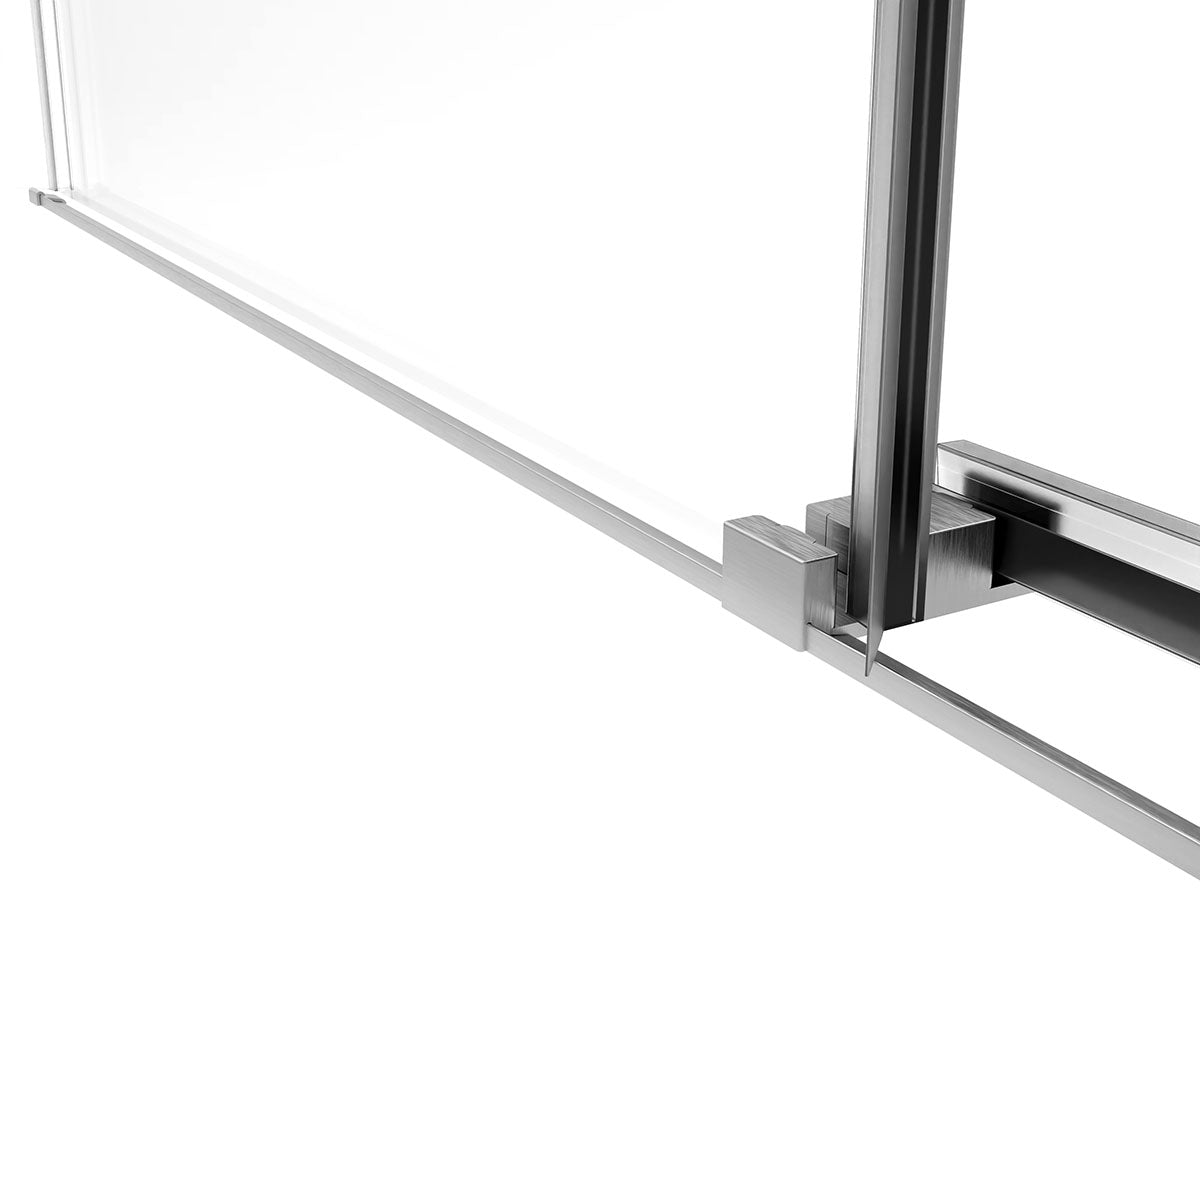 60" Tub Door Frameless Bypass  with Klearteck Treatment (3/8" Thickness) (Chrome) DQZ Nicholas Series - iStyle Bath